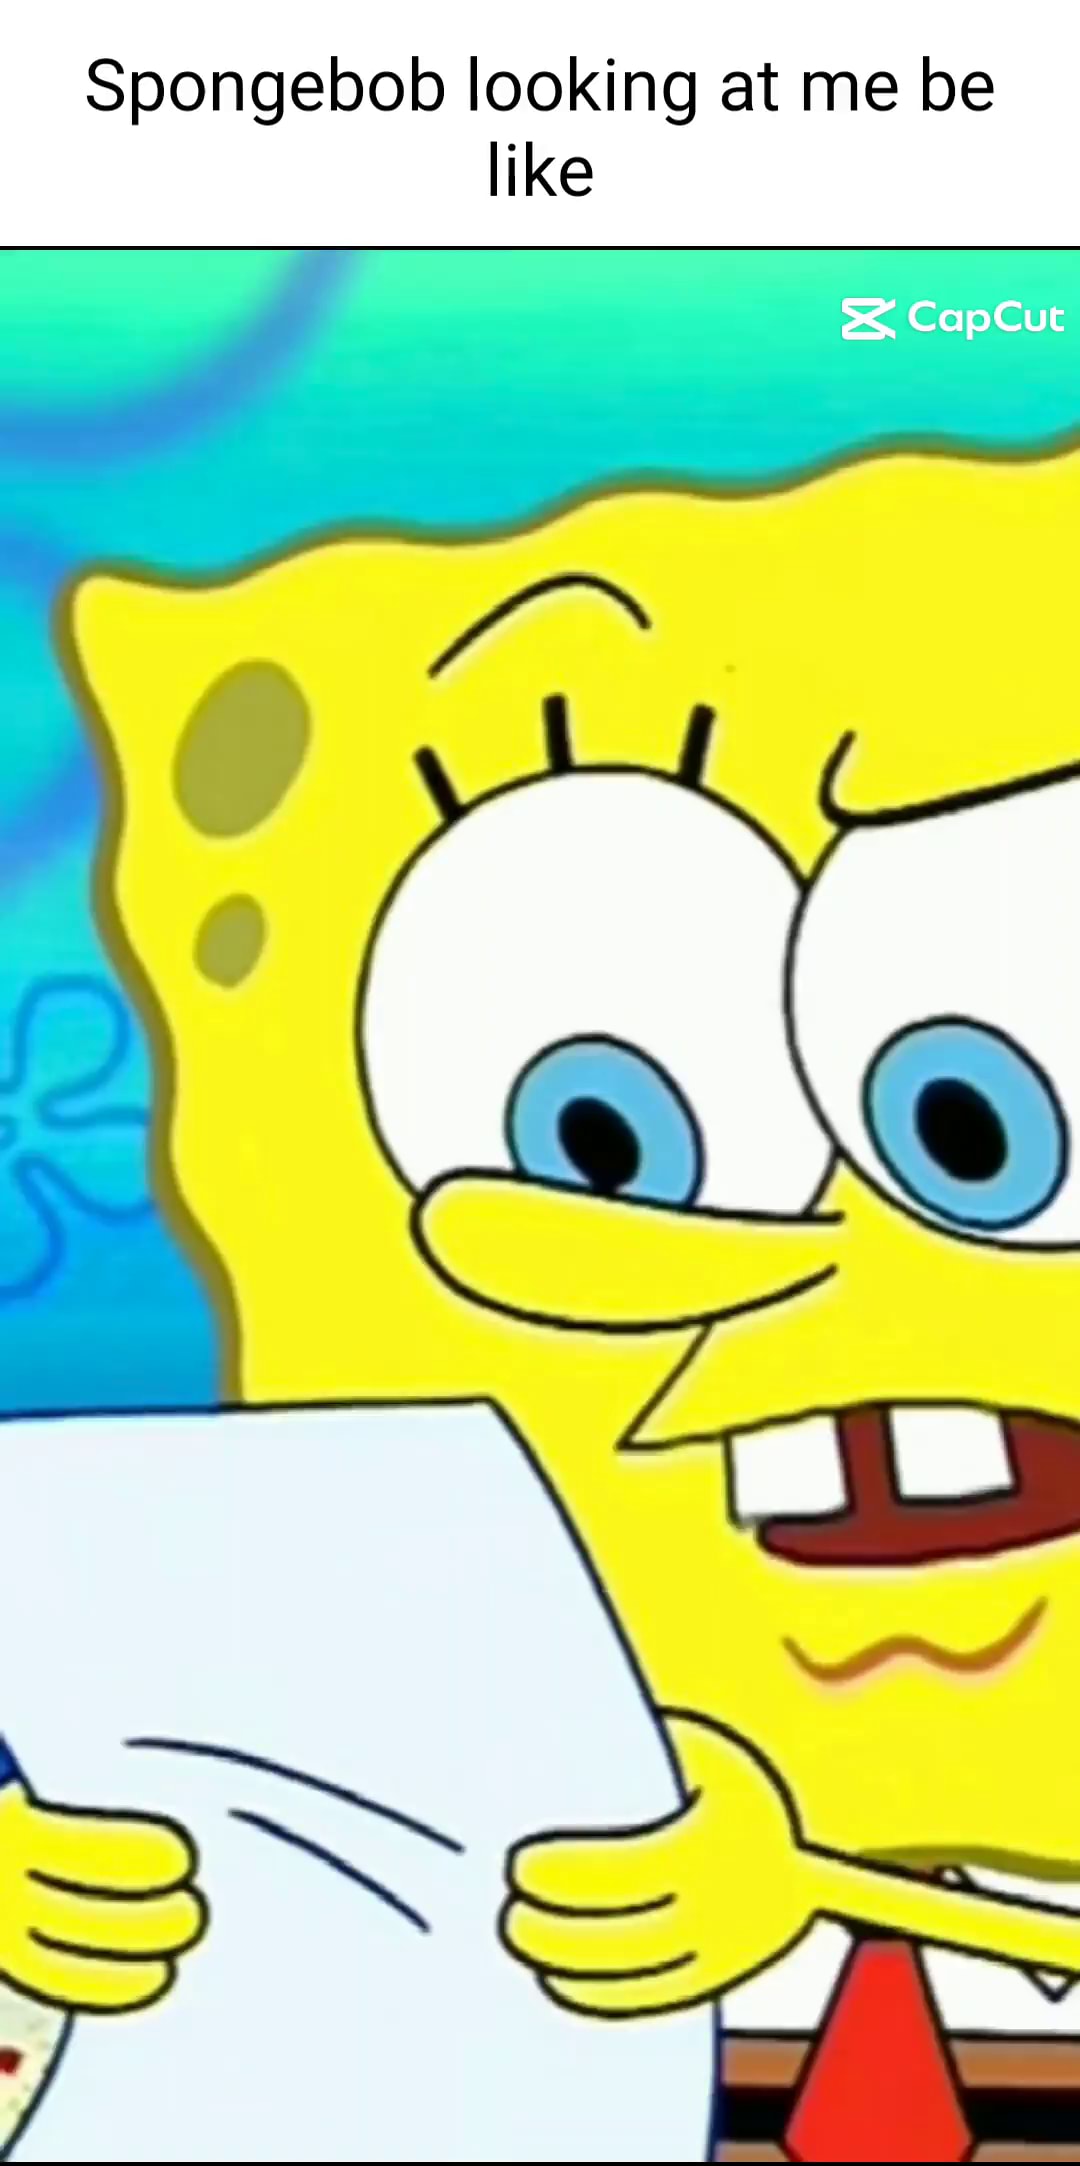 CapCut_would you do anything for me. sponsbob